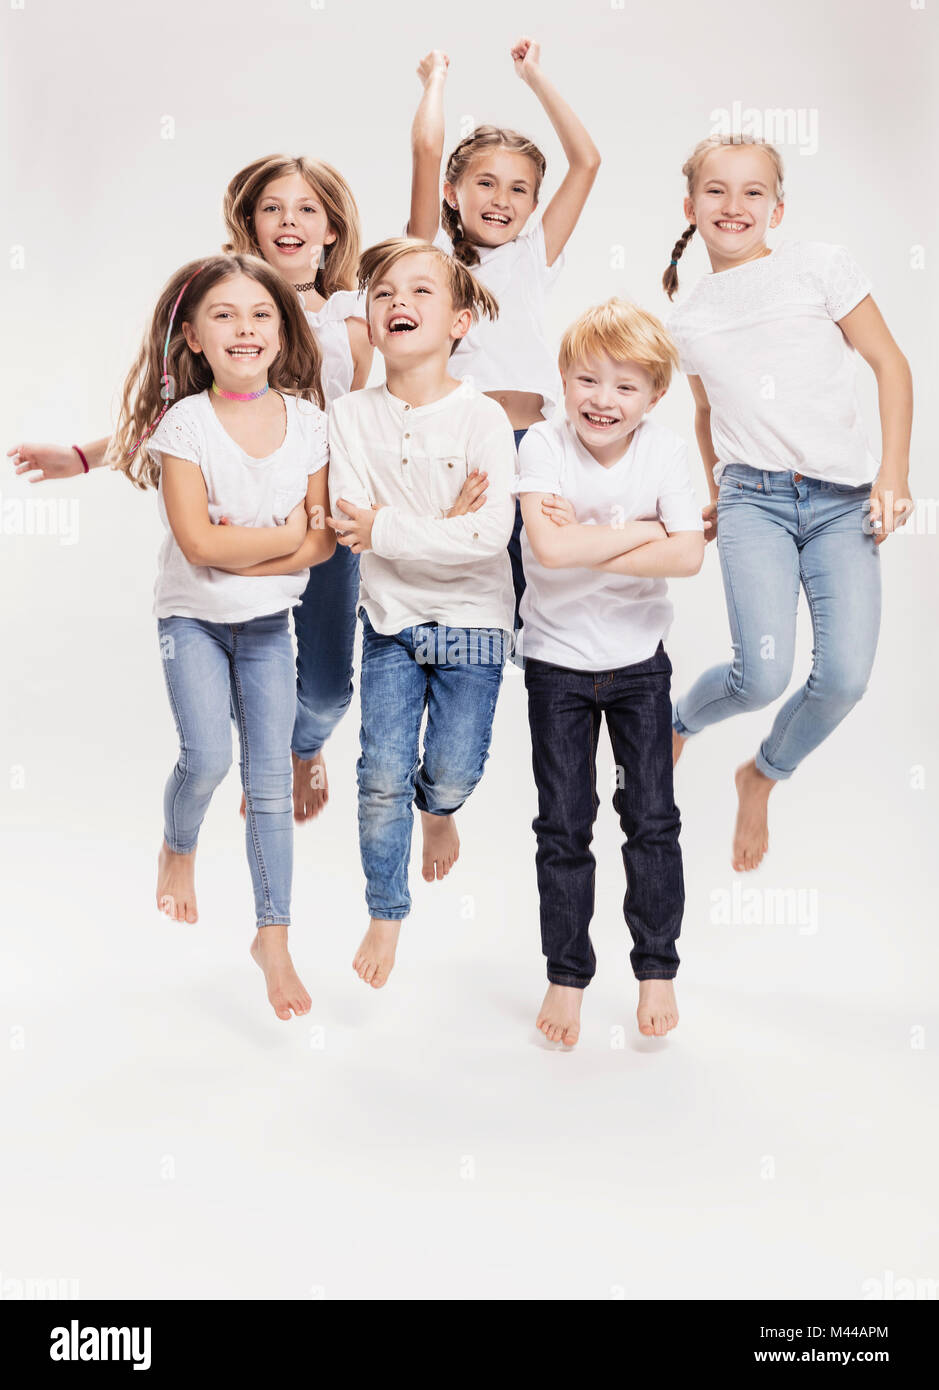 Studio portrait of two boys and four girls having fun jumping mid air, full length Stock Photo